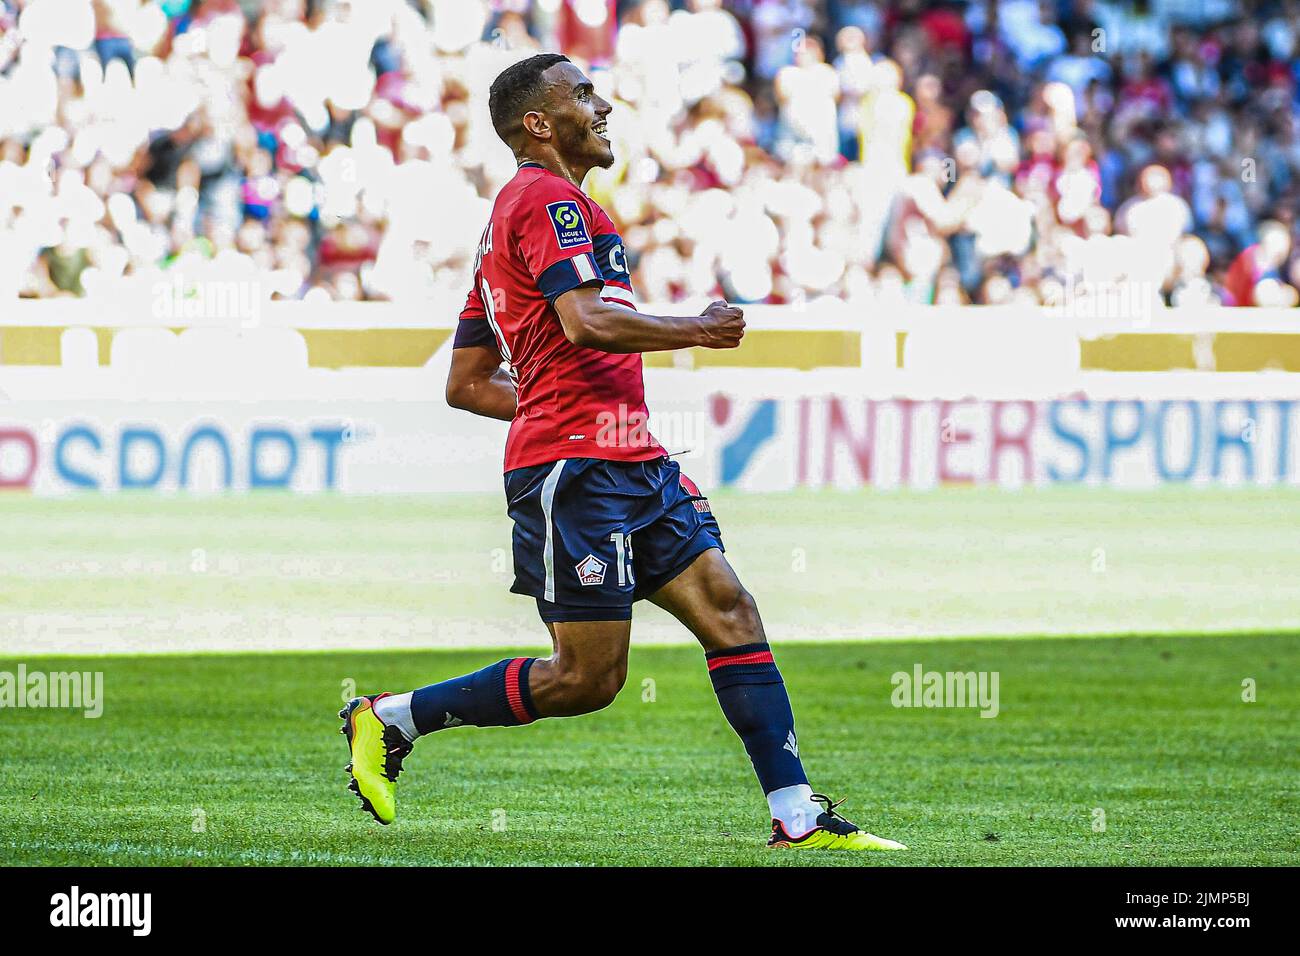 LILLE, FRANCE - AUGUST 7: Akim Zedadka of Lille during the French Ligue 1 match between Lille and Auxerre at Stade Pierre Mauroy on August 7, 2022 in Lille, France (Photo by Matthieu Mirville/Orange Pictures) Stock Photo